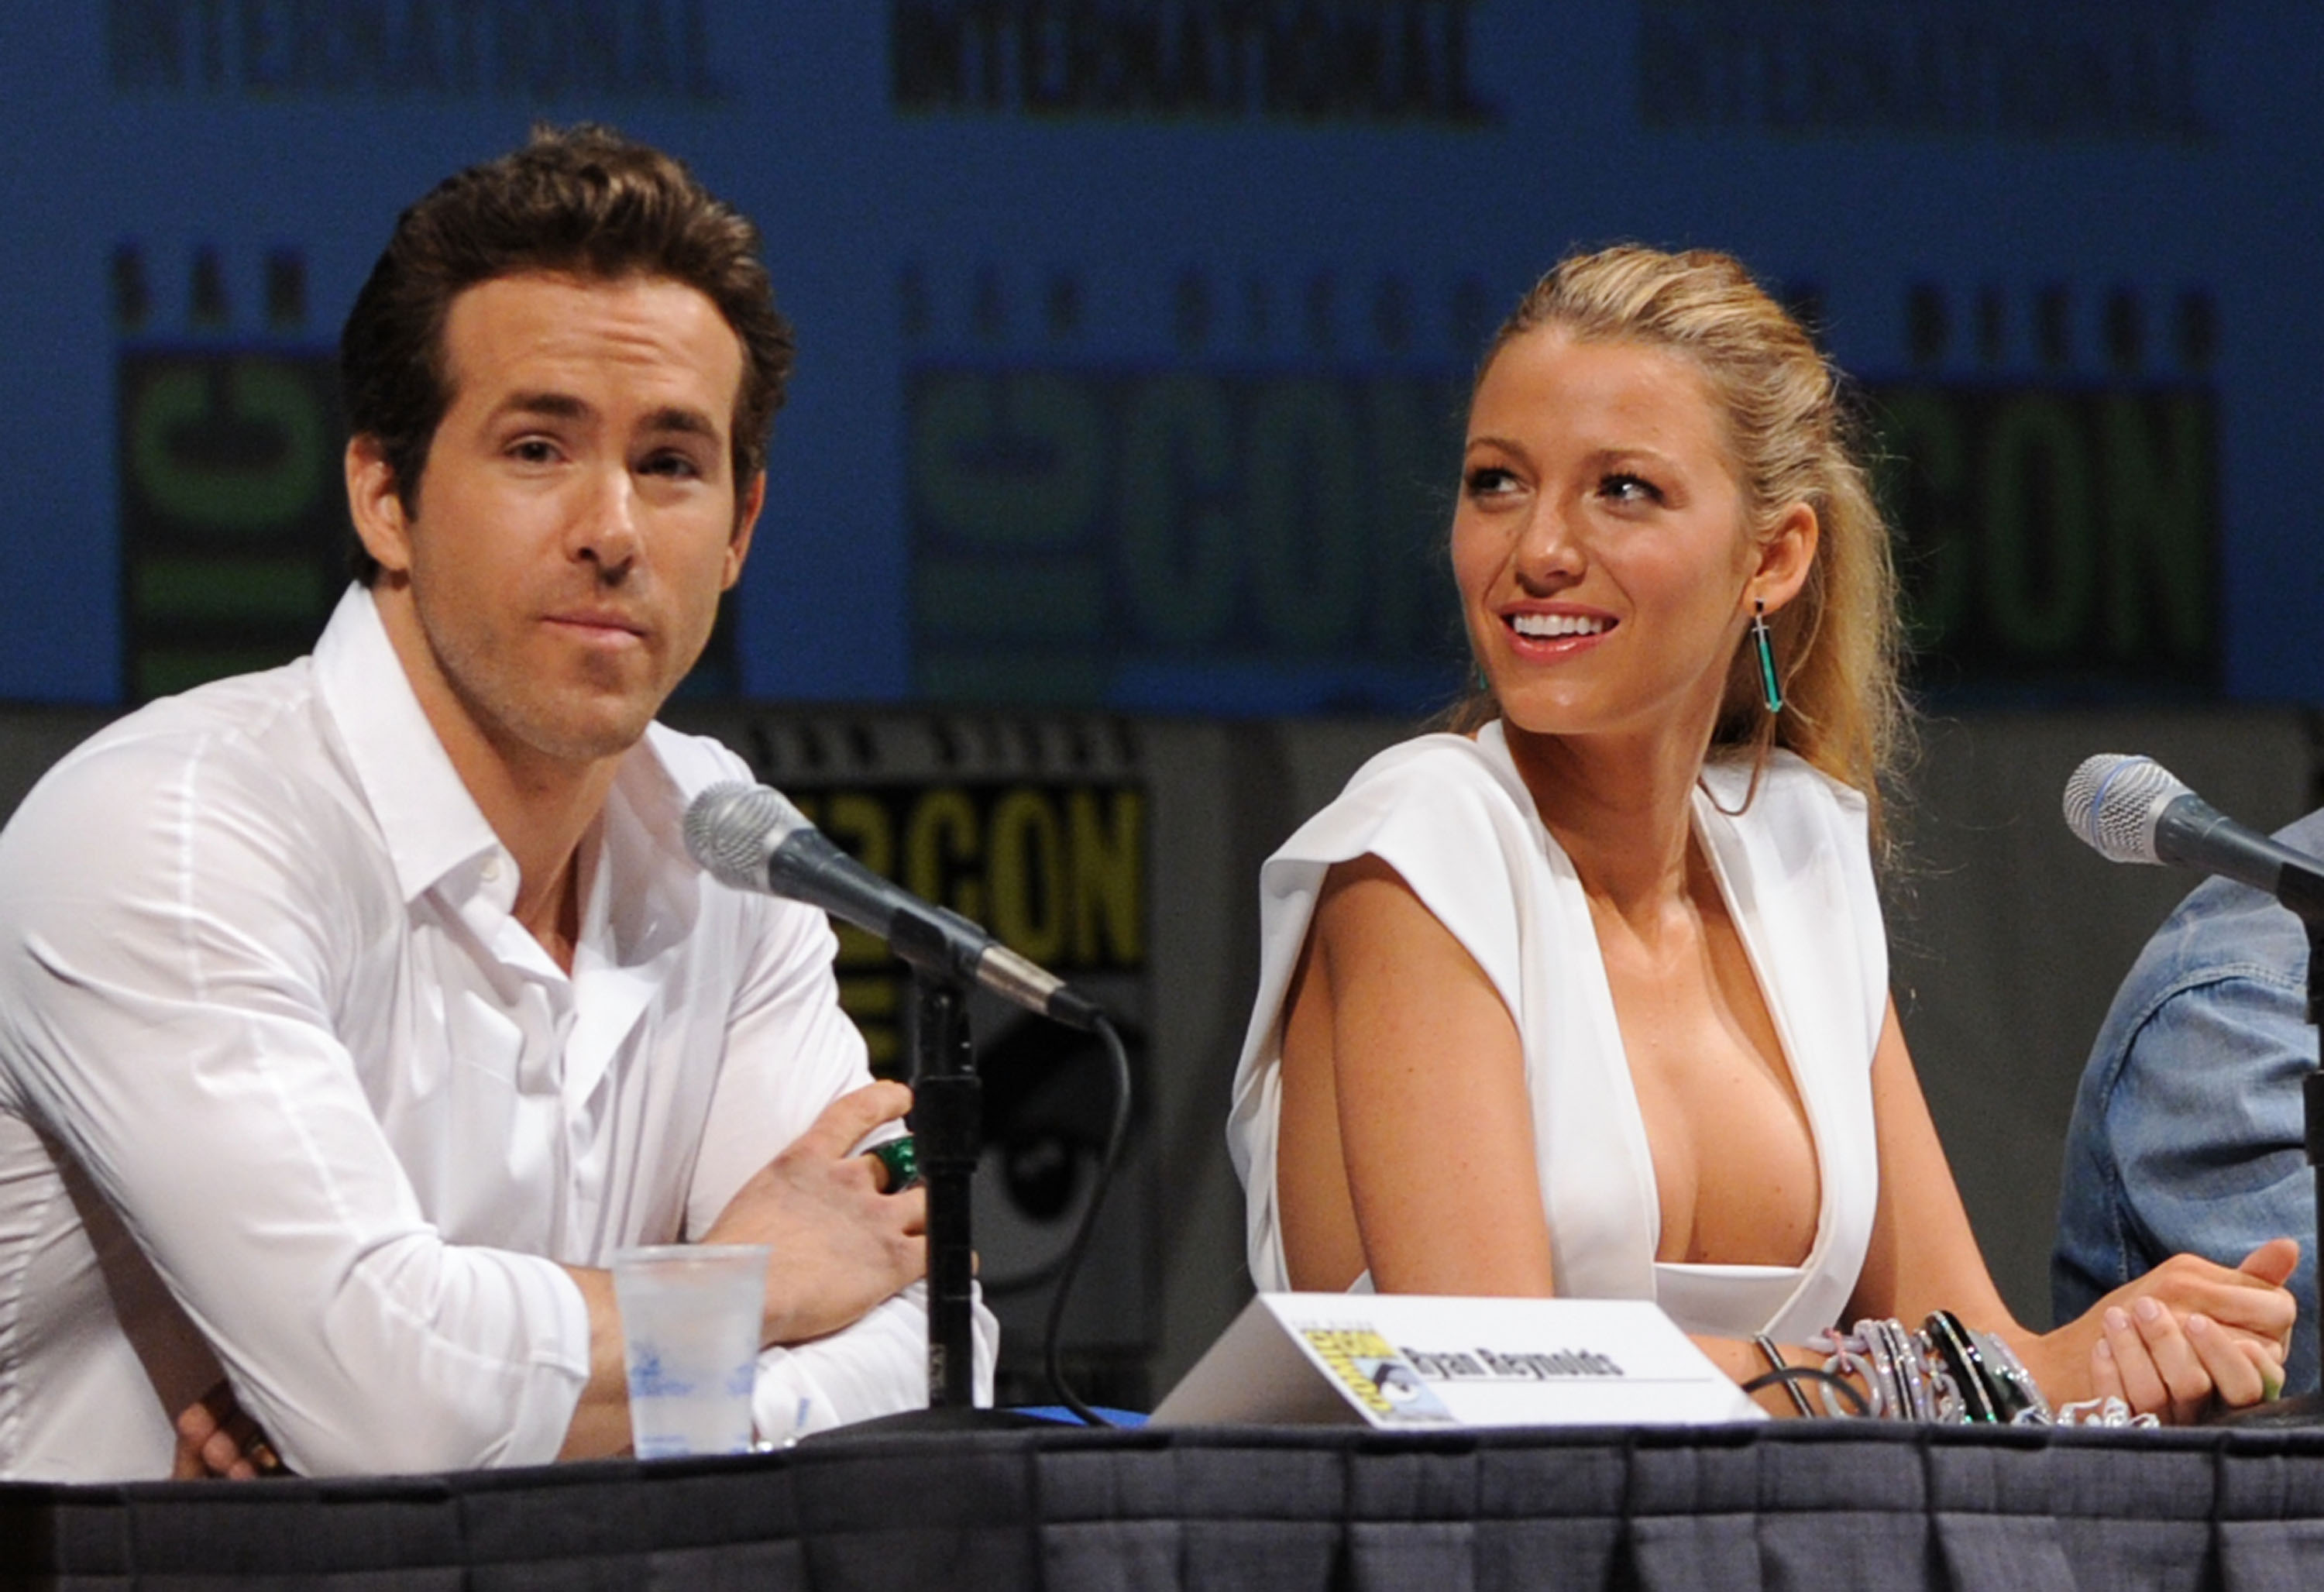 Ryan Reynolds and Blake Lively speak onstage at the "Green Lantern" panel discussion during Comic-Con 2010 at San Diego Convention Center, on July 24, 2010, in San Diego, California. | Source: Getty Images